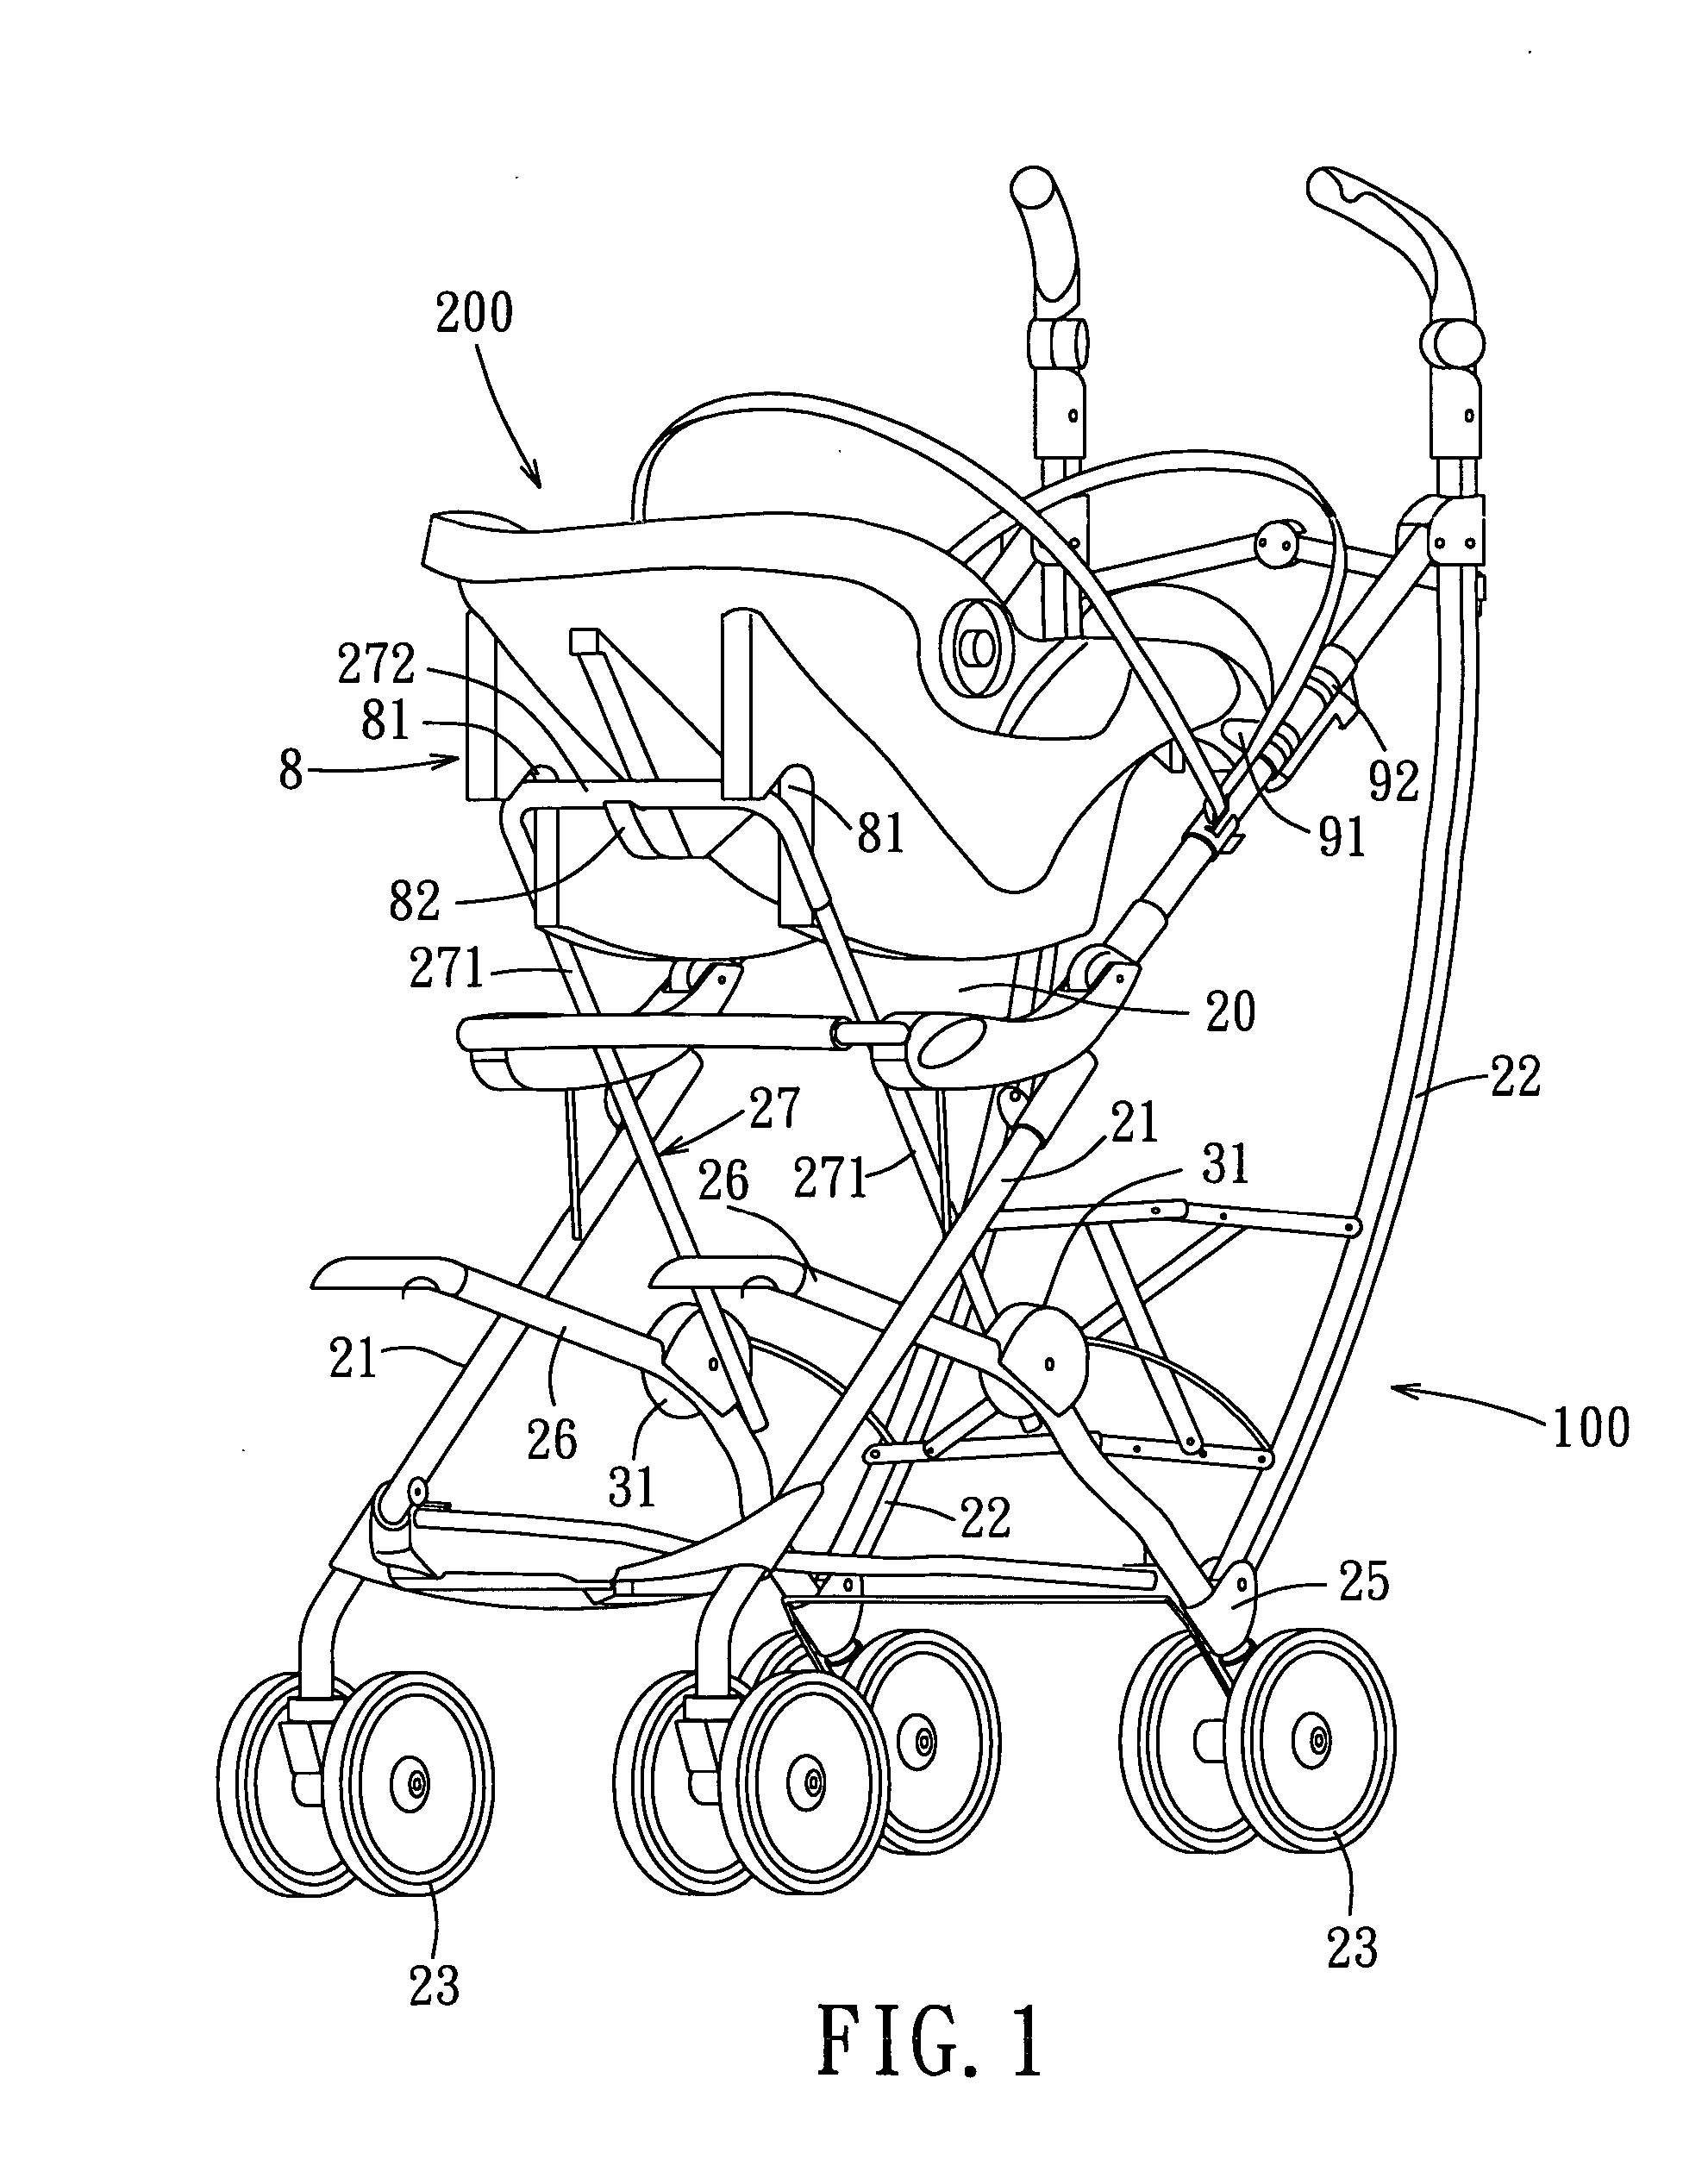 Baby carriage chassis adapted to support a baby's car seat thereon